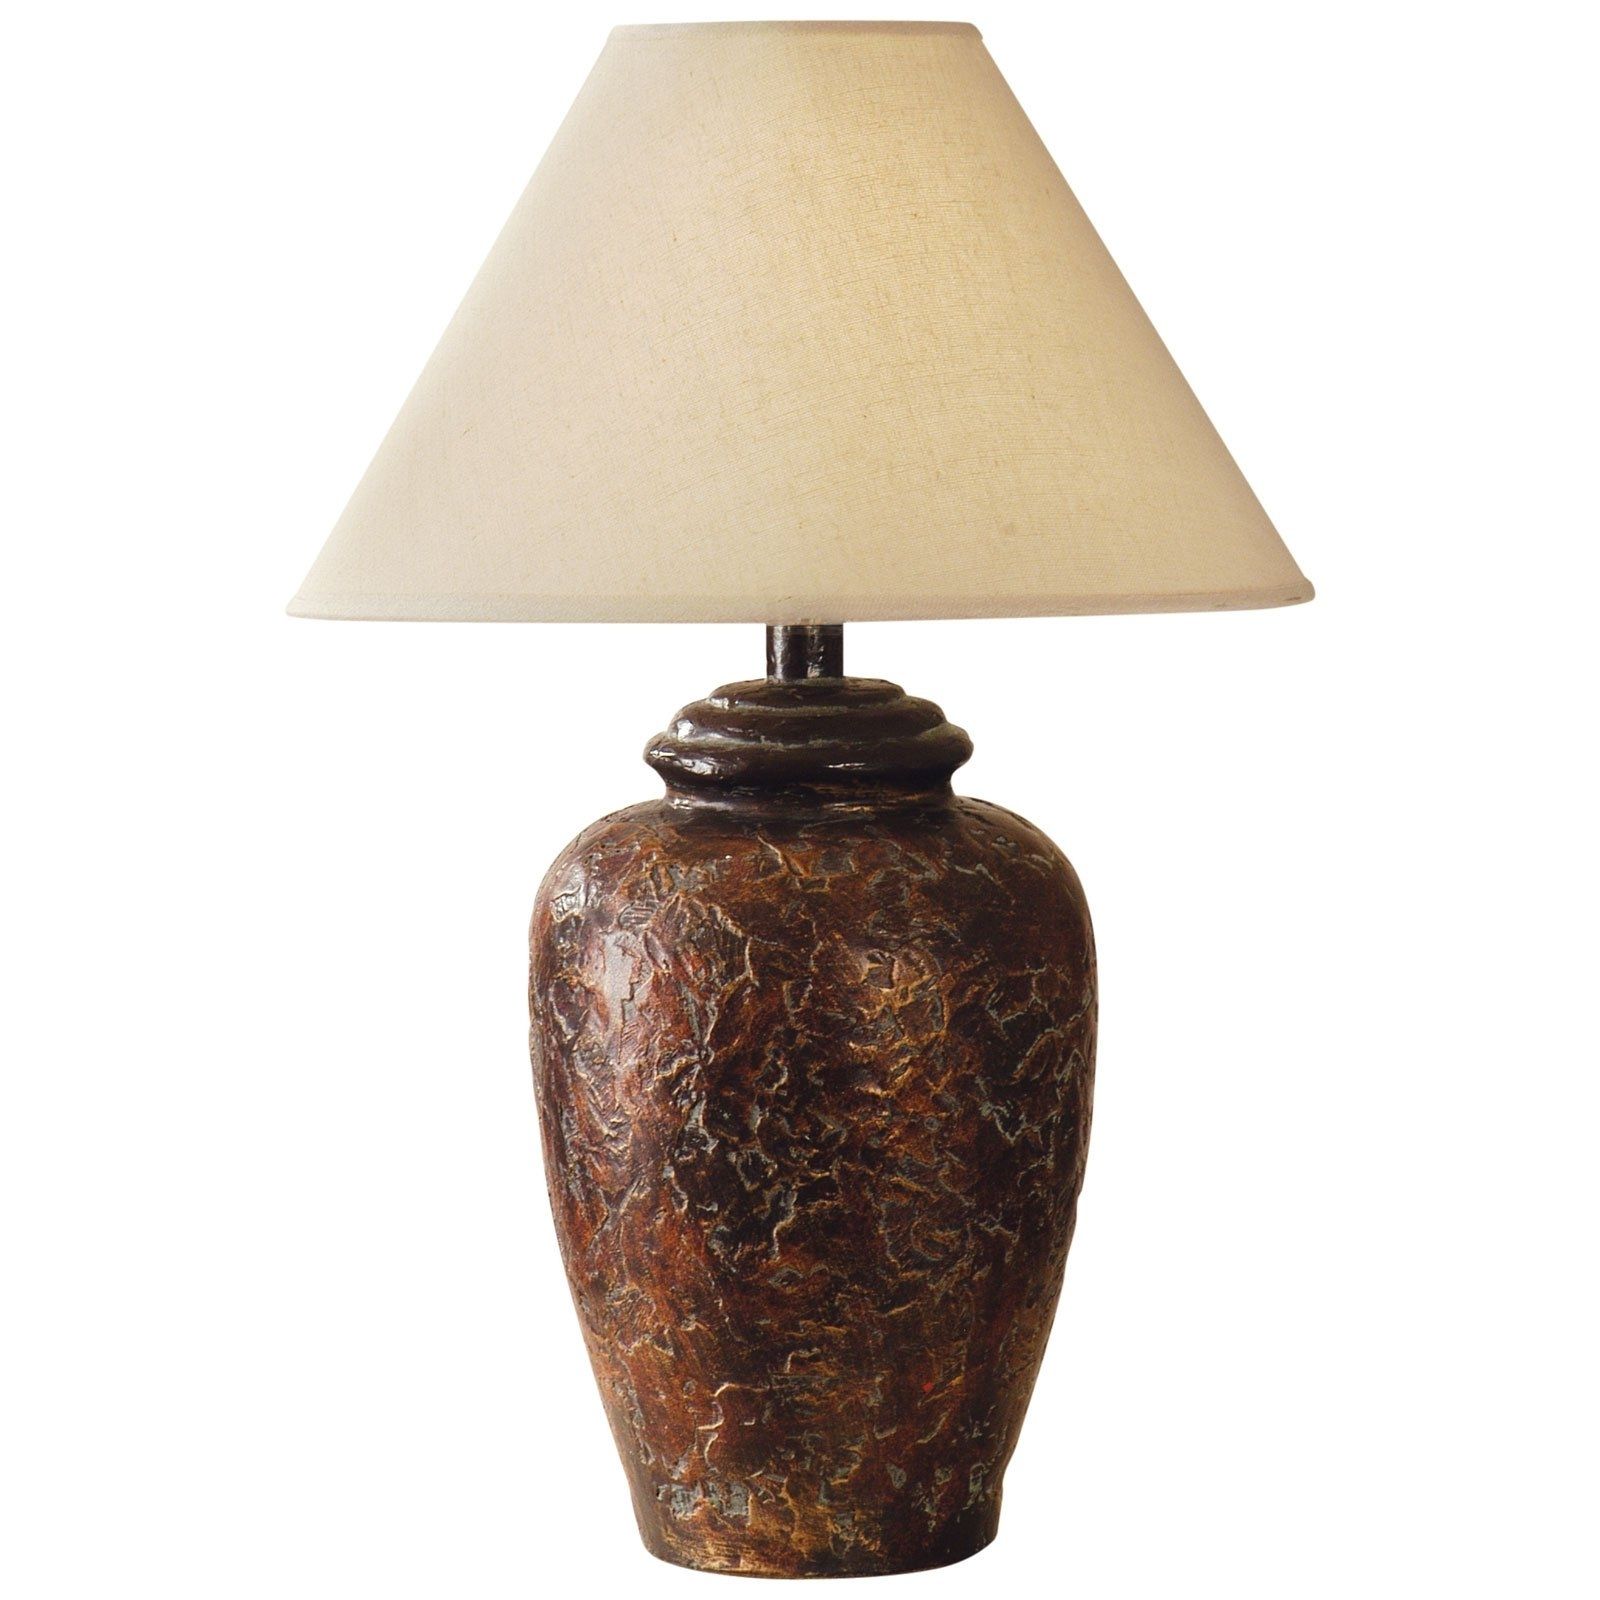 Traditional Table Lamps For Living Room Regarding Most Up To Date Furniture : Traditional Table Lamps Oregonuforeview Home Furniture (View 8 of 20)